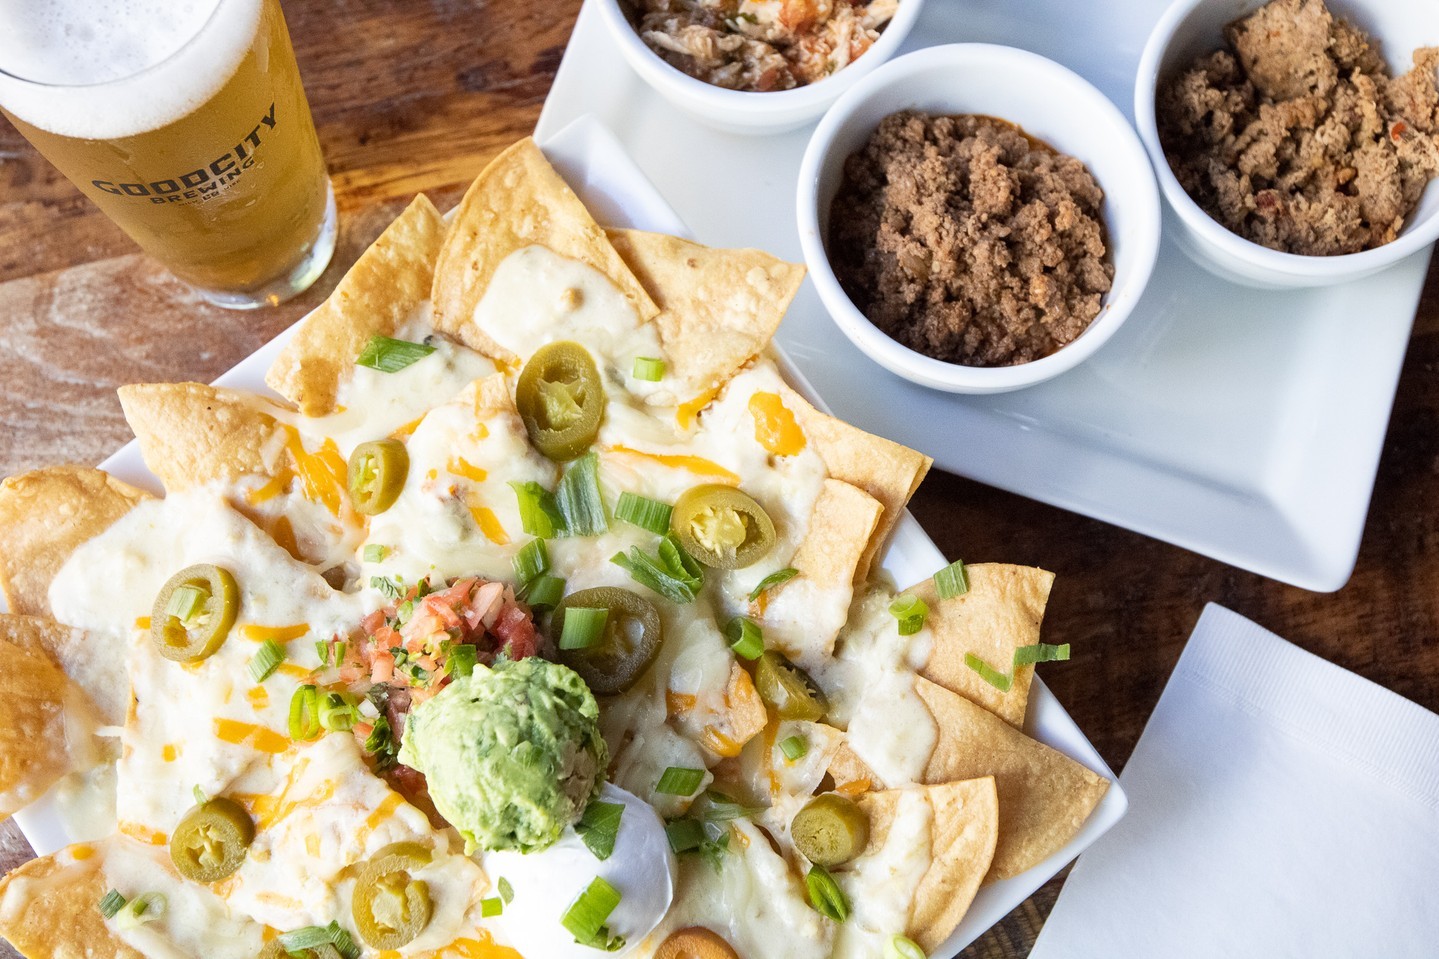 Good City Brewing's nachos and beer